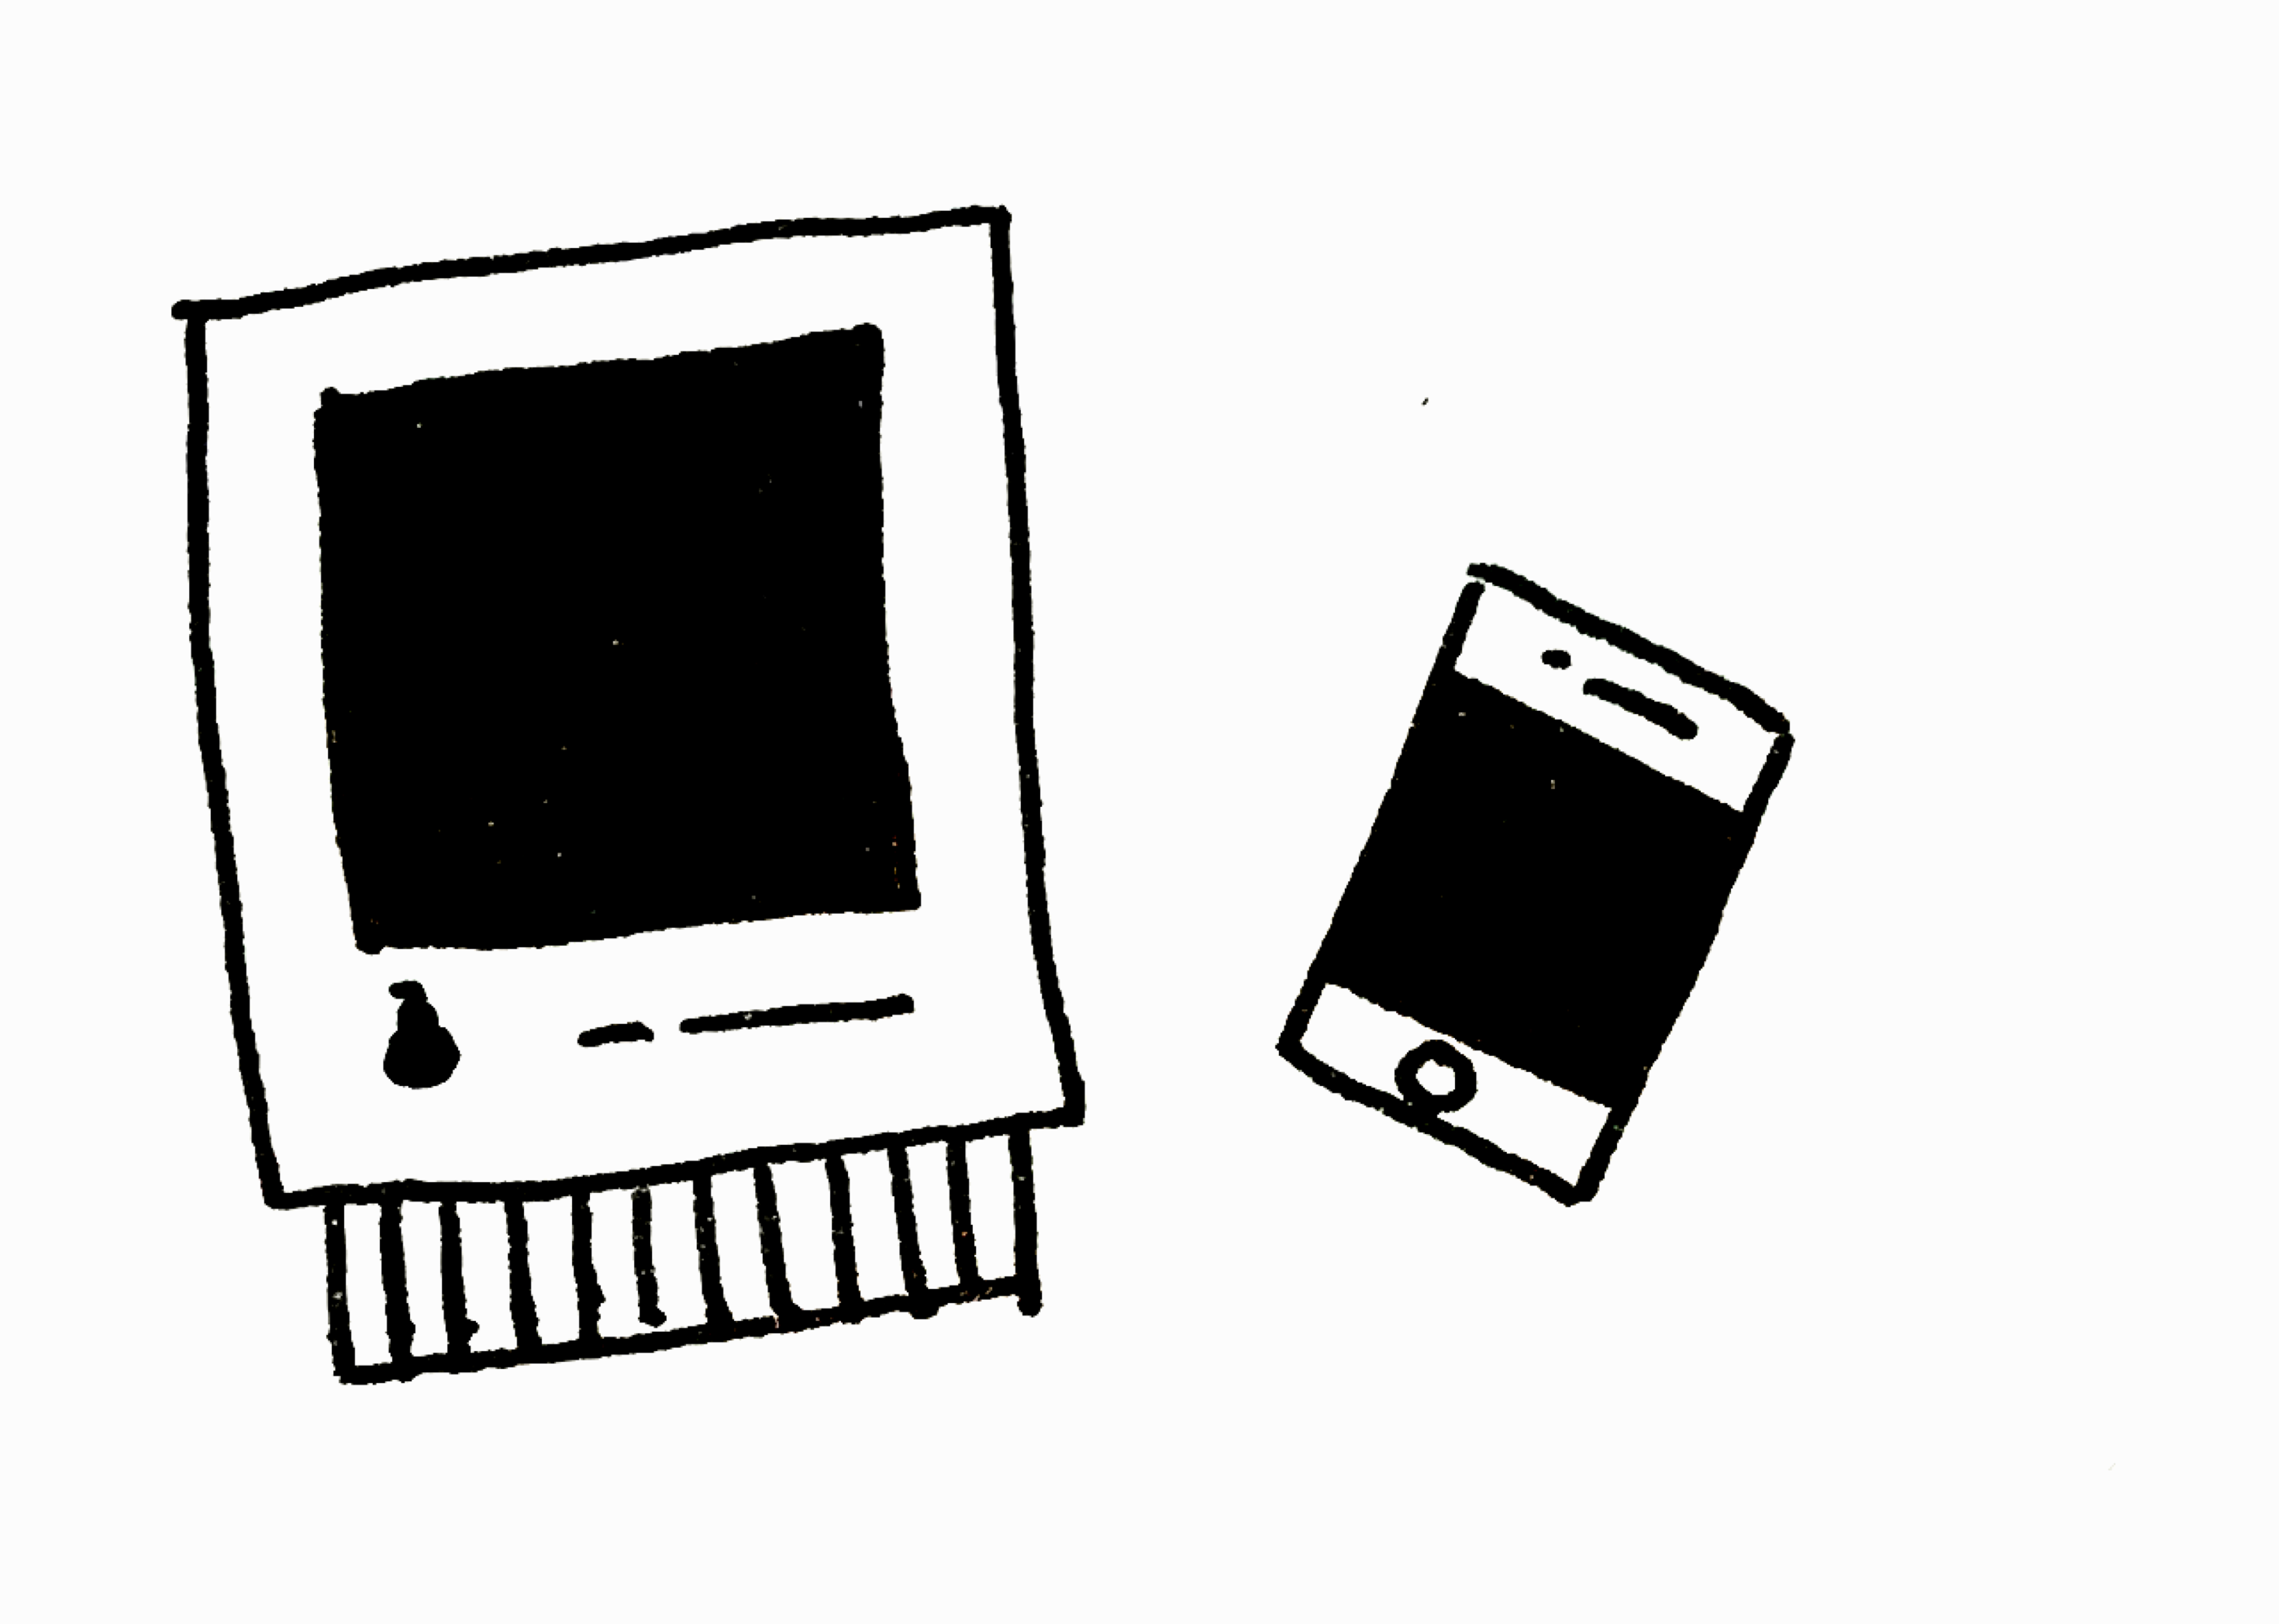 An illustration of a smartphone and a retro computer.